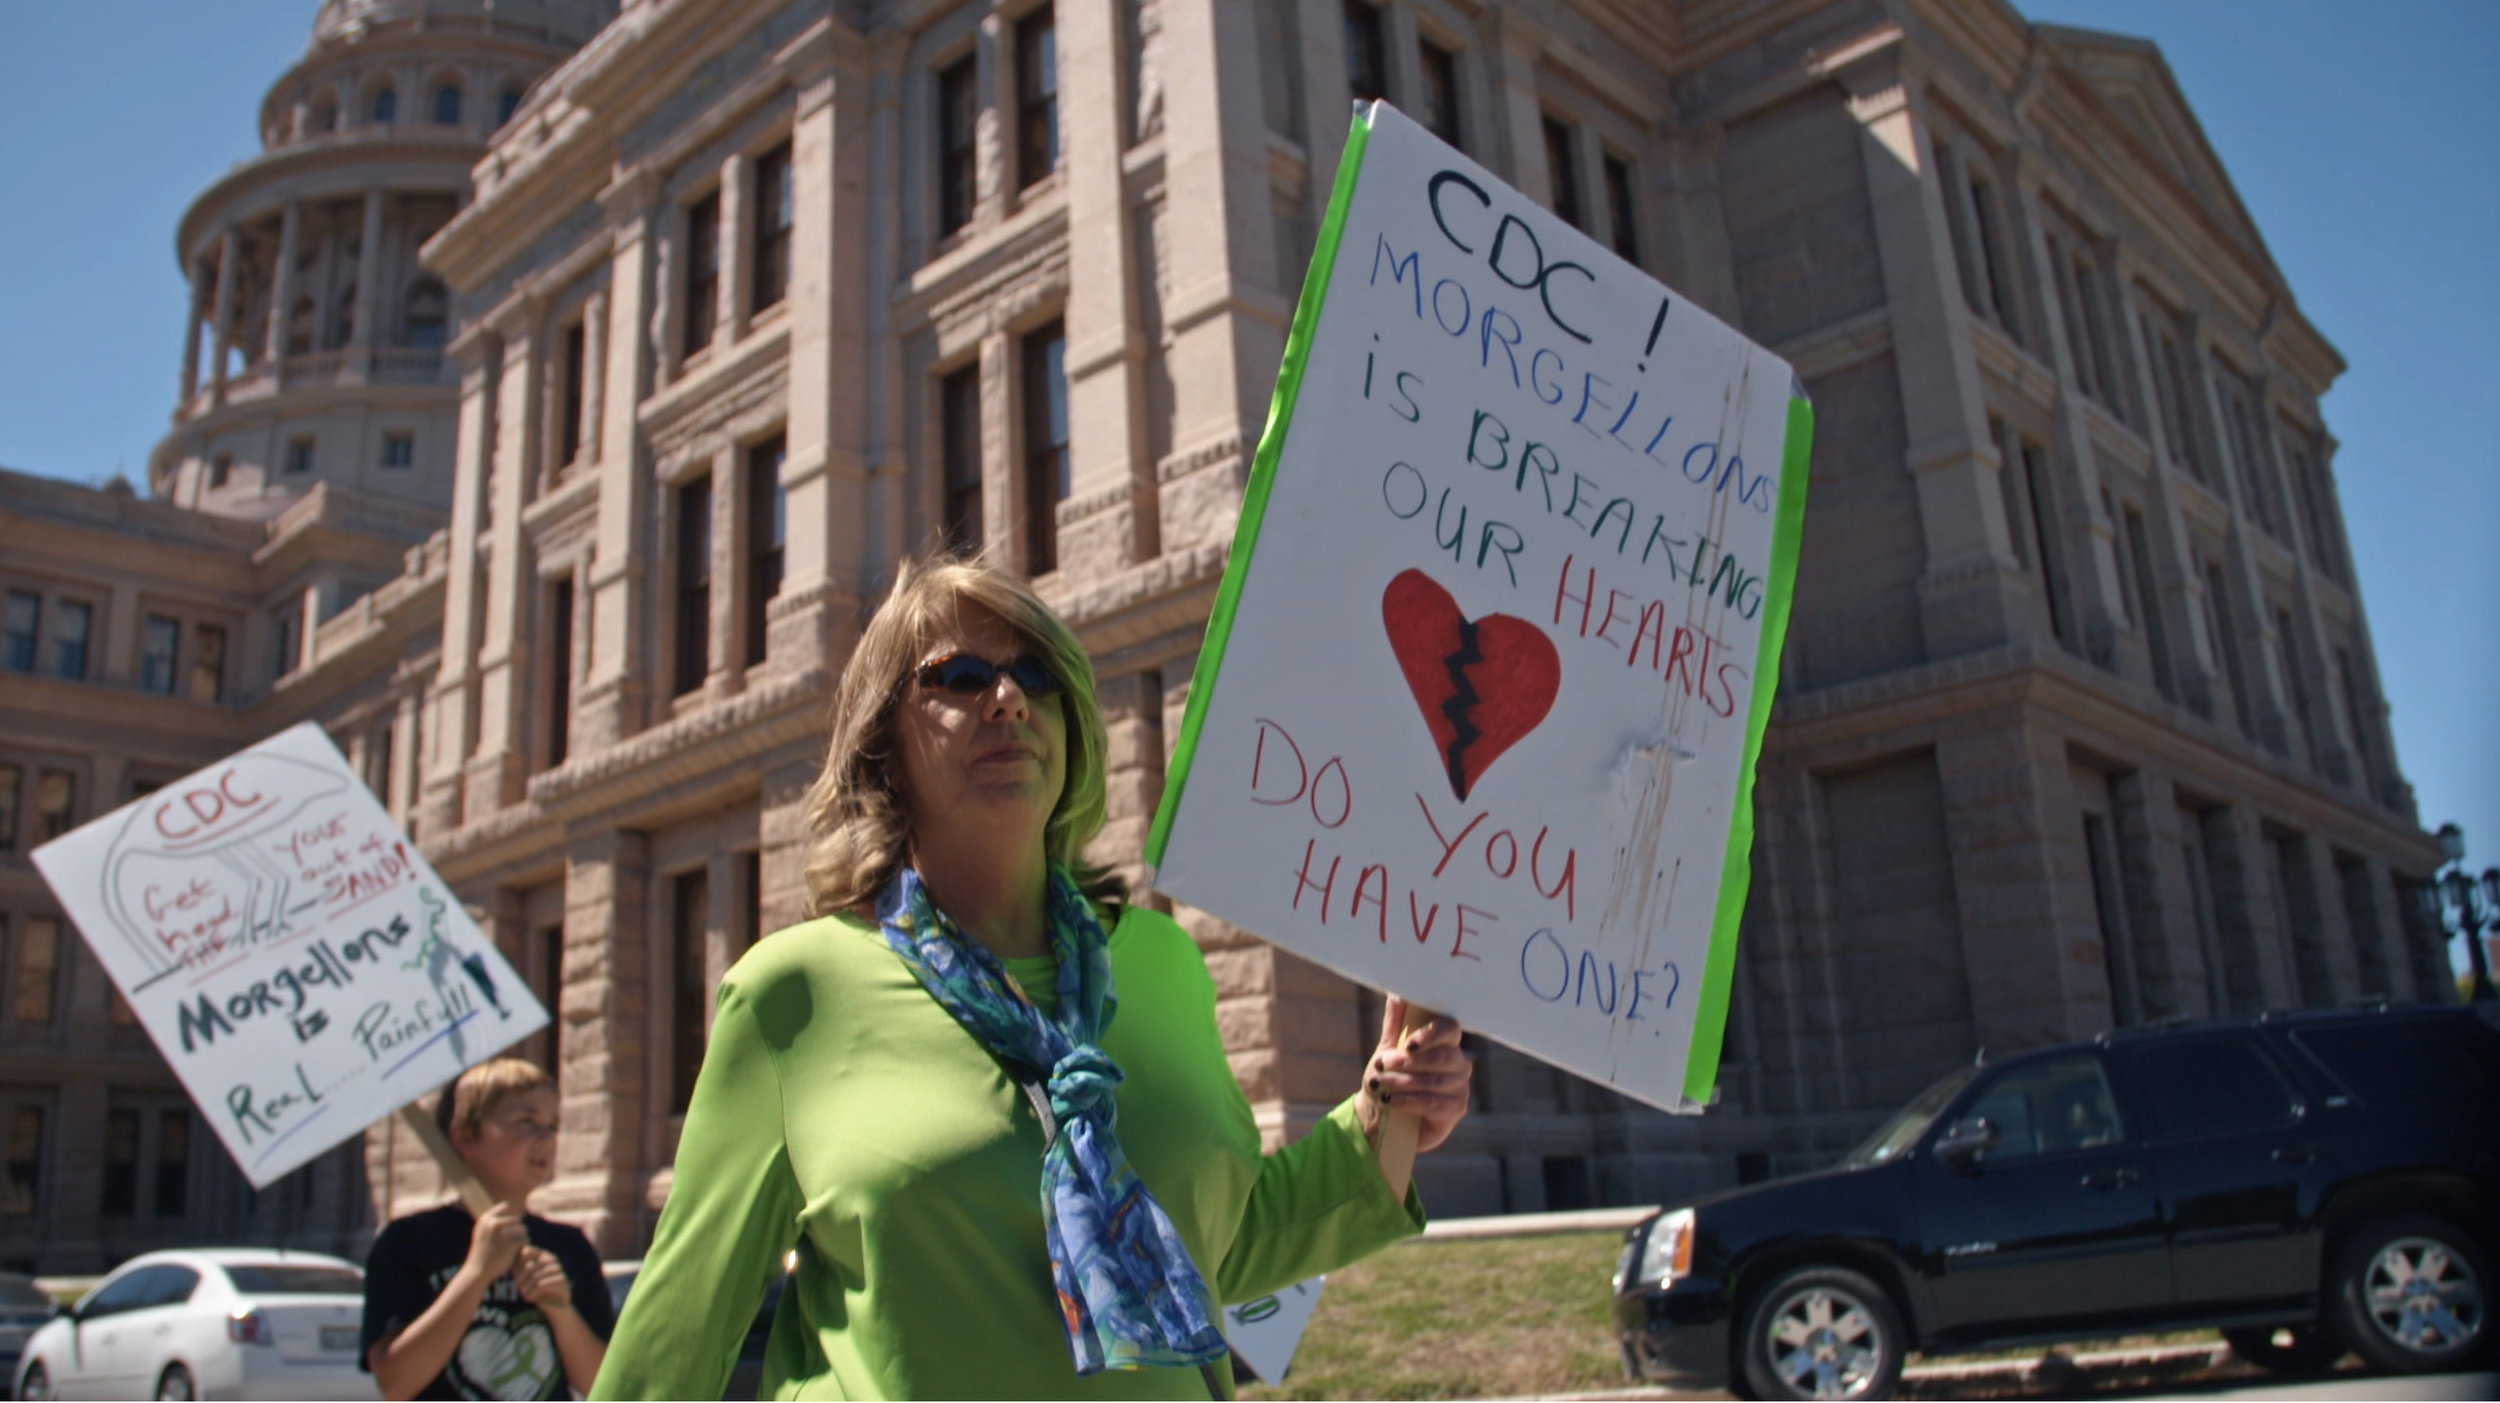  In the documentary film, “Skin Deep: The Battle Over Morgellons”, Cindy Casey-Holman and other activists protest at the Texas State Capital in an effort to bring awareness to the lack of medical treatment for Morgellons Disease patients. 